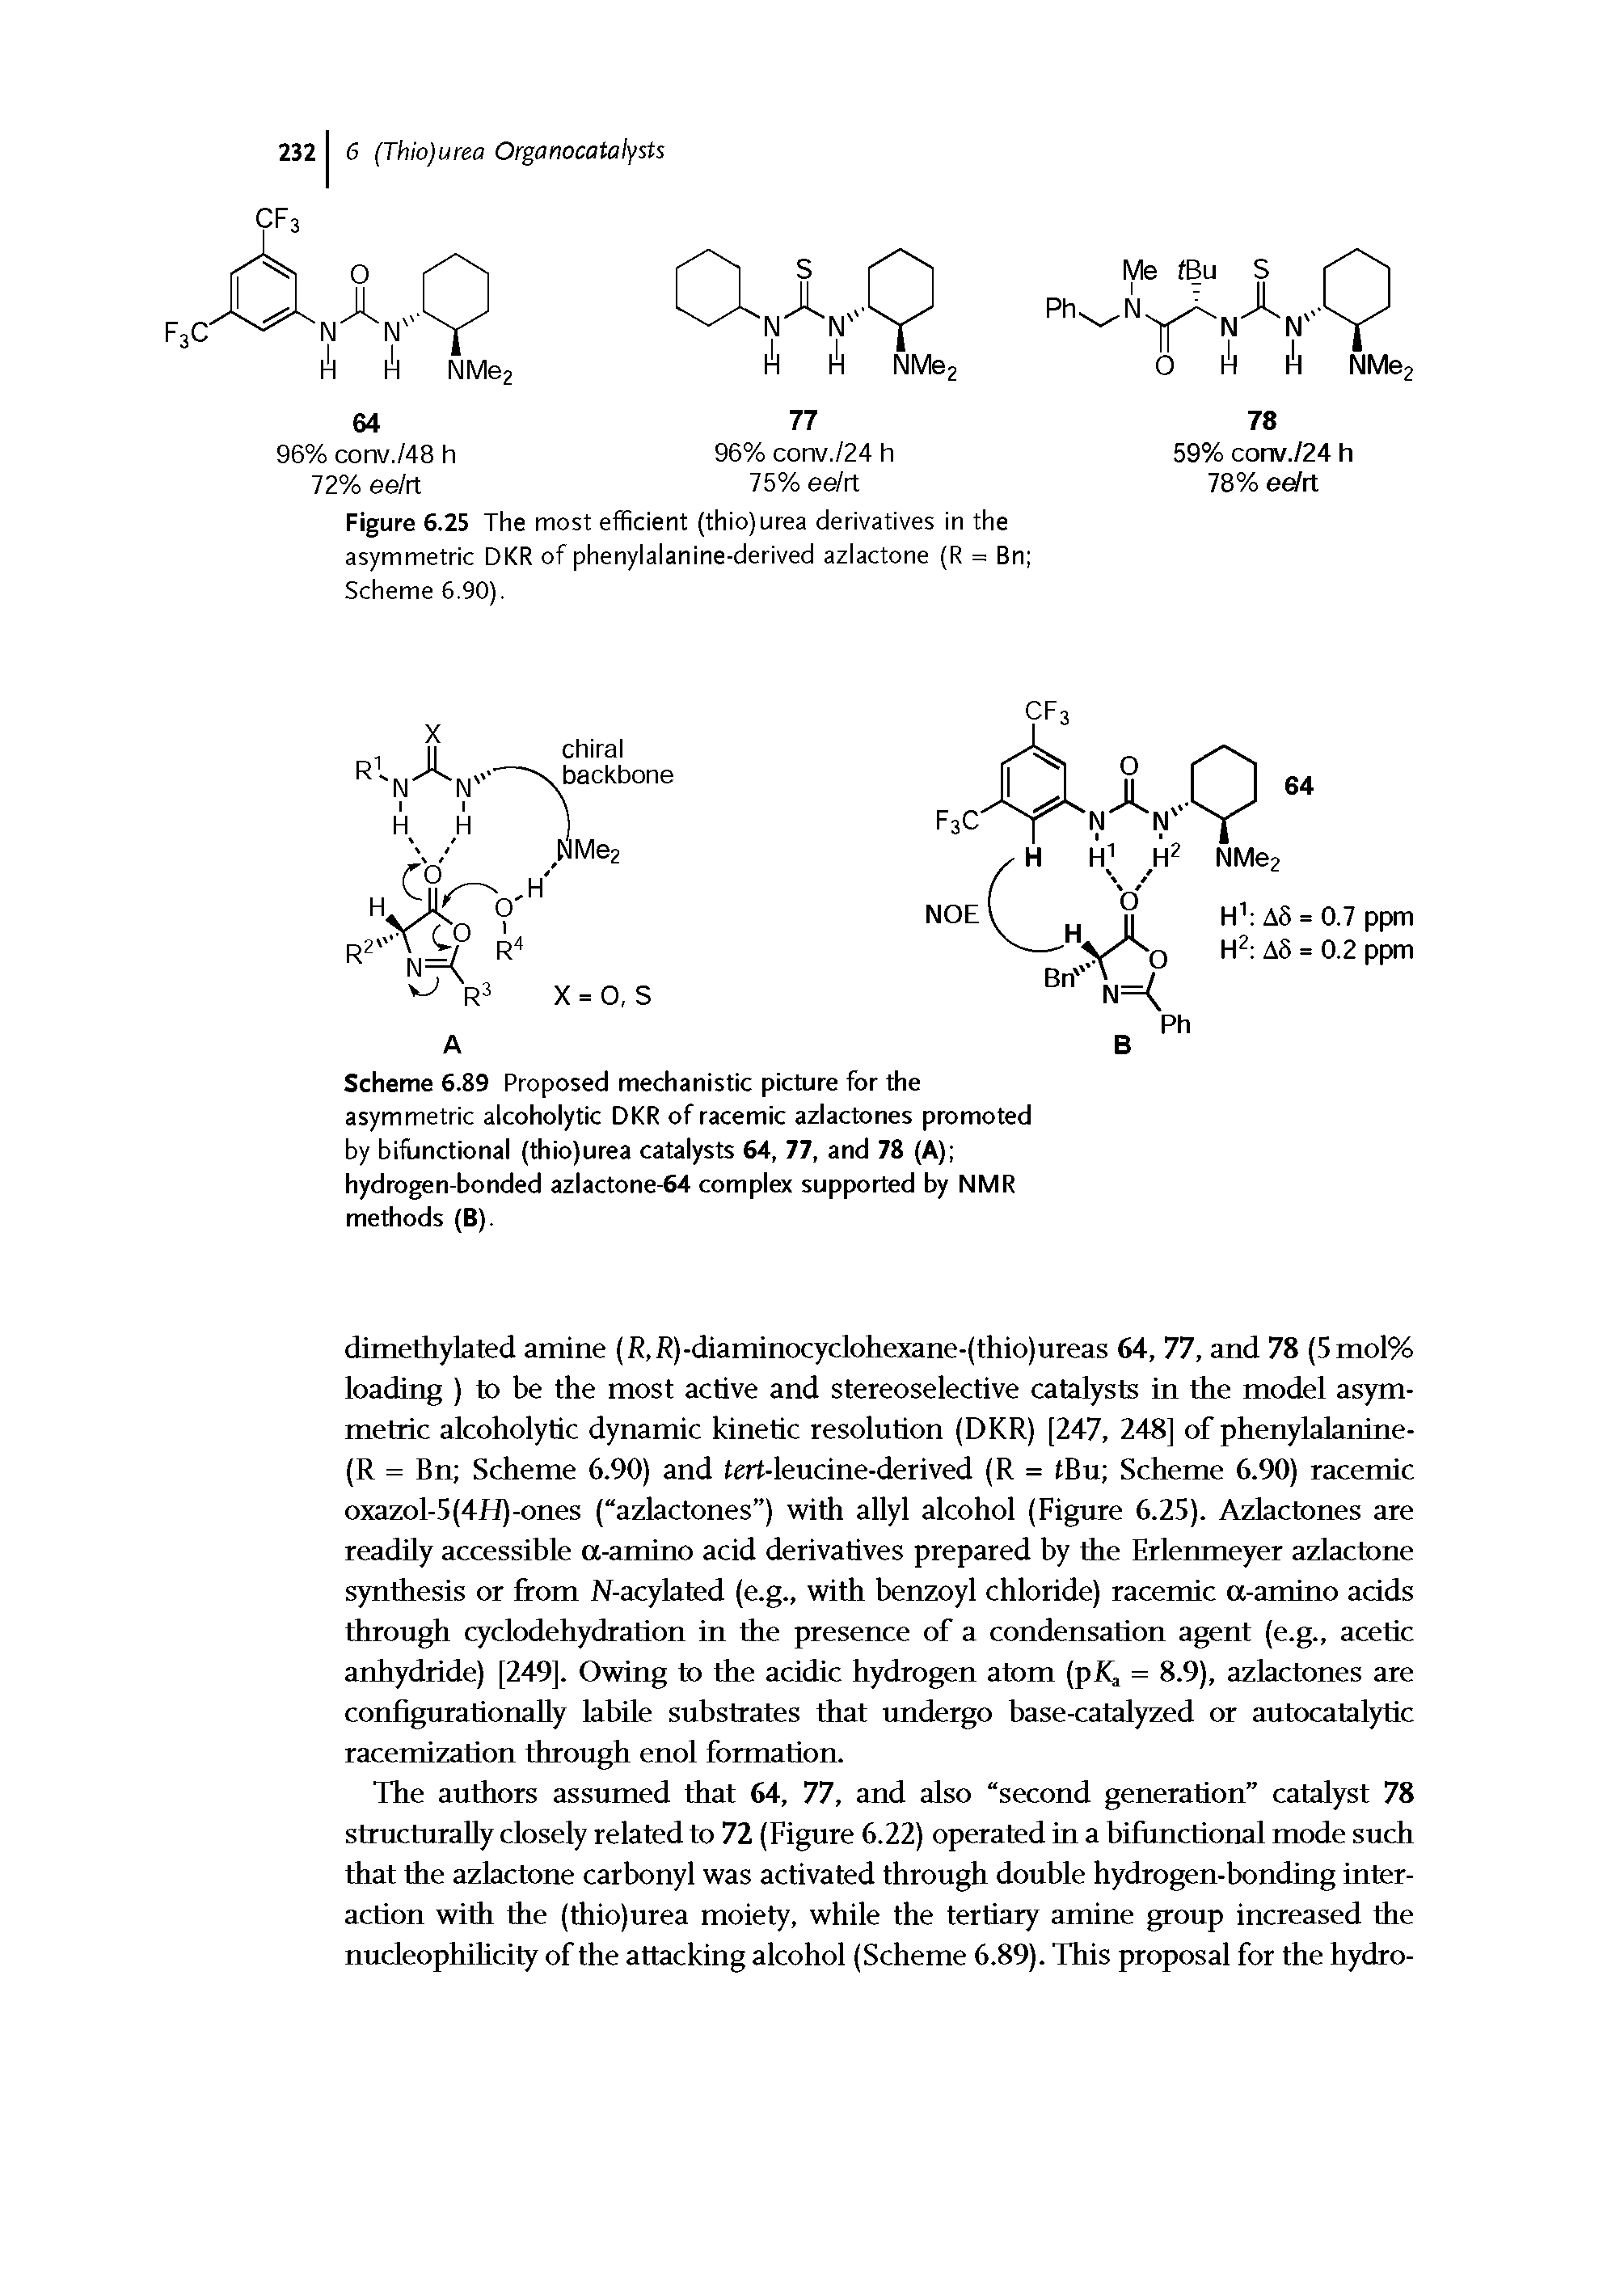 Scheme 6.89 Proposed mechanistic picture for the asymmetric alcoholytic DKR of racemic aziactones promoted by bifunctional (thio)urea catalysts 64, 77, and 78 (A) hydrogen-bonded azlactone-64 complex supported by NMR methods (B).